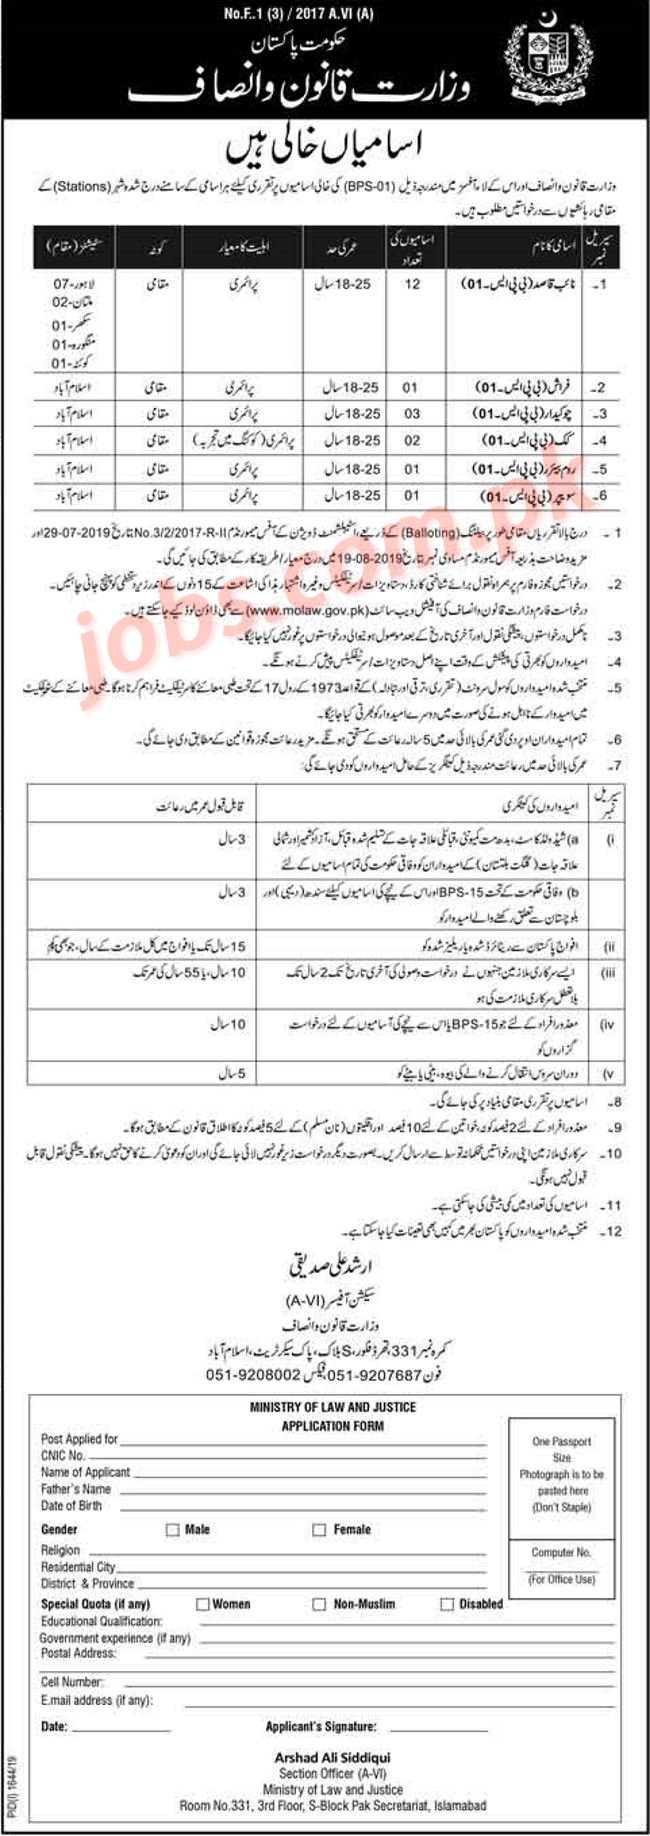 Ministry Of Law & Justice Pakistan Jobs 2019 20+ Support Staff (Multiple Cities)